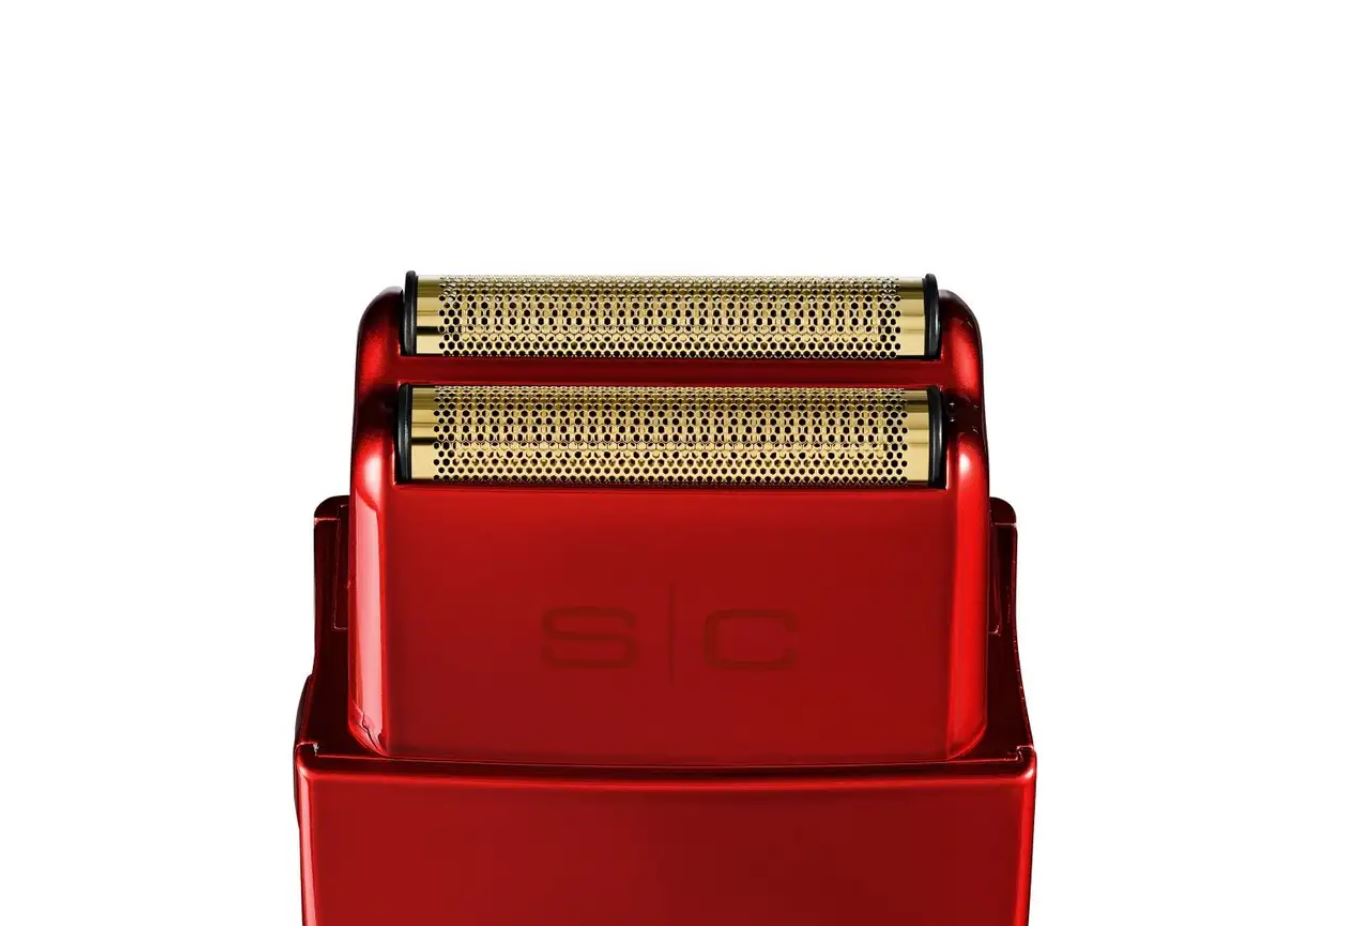 Stylecraft - Wireless Prodigy Professional Turbo Charged  Foil Shaver - RED